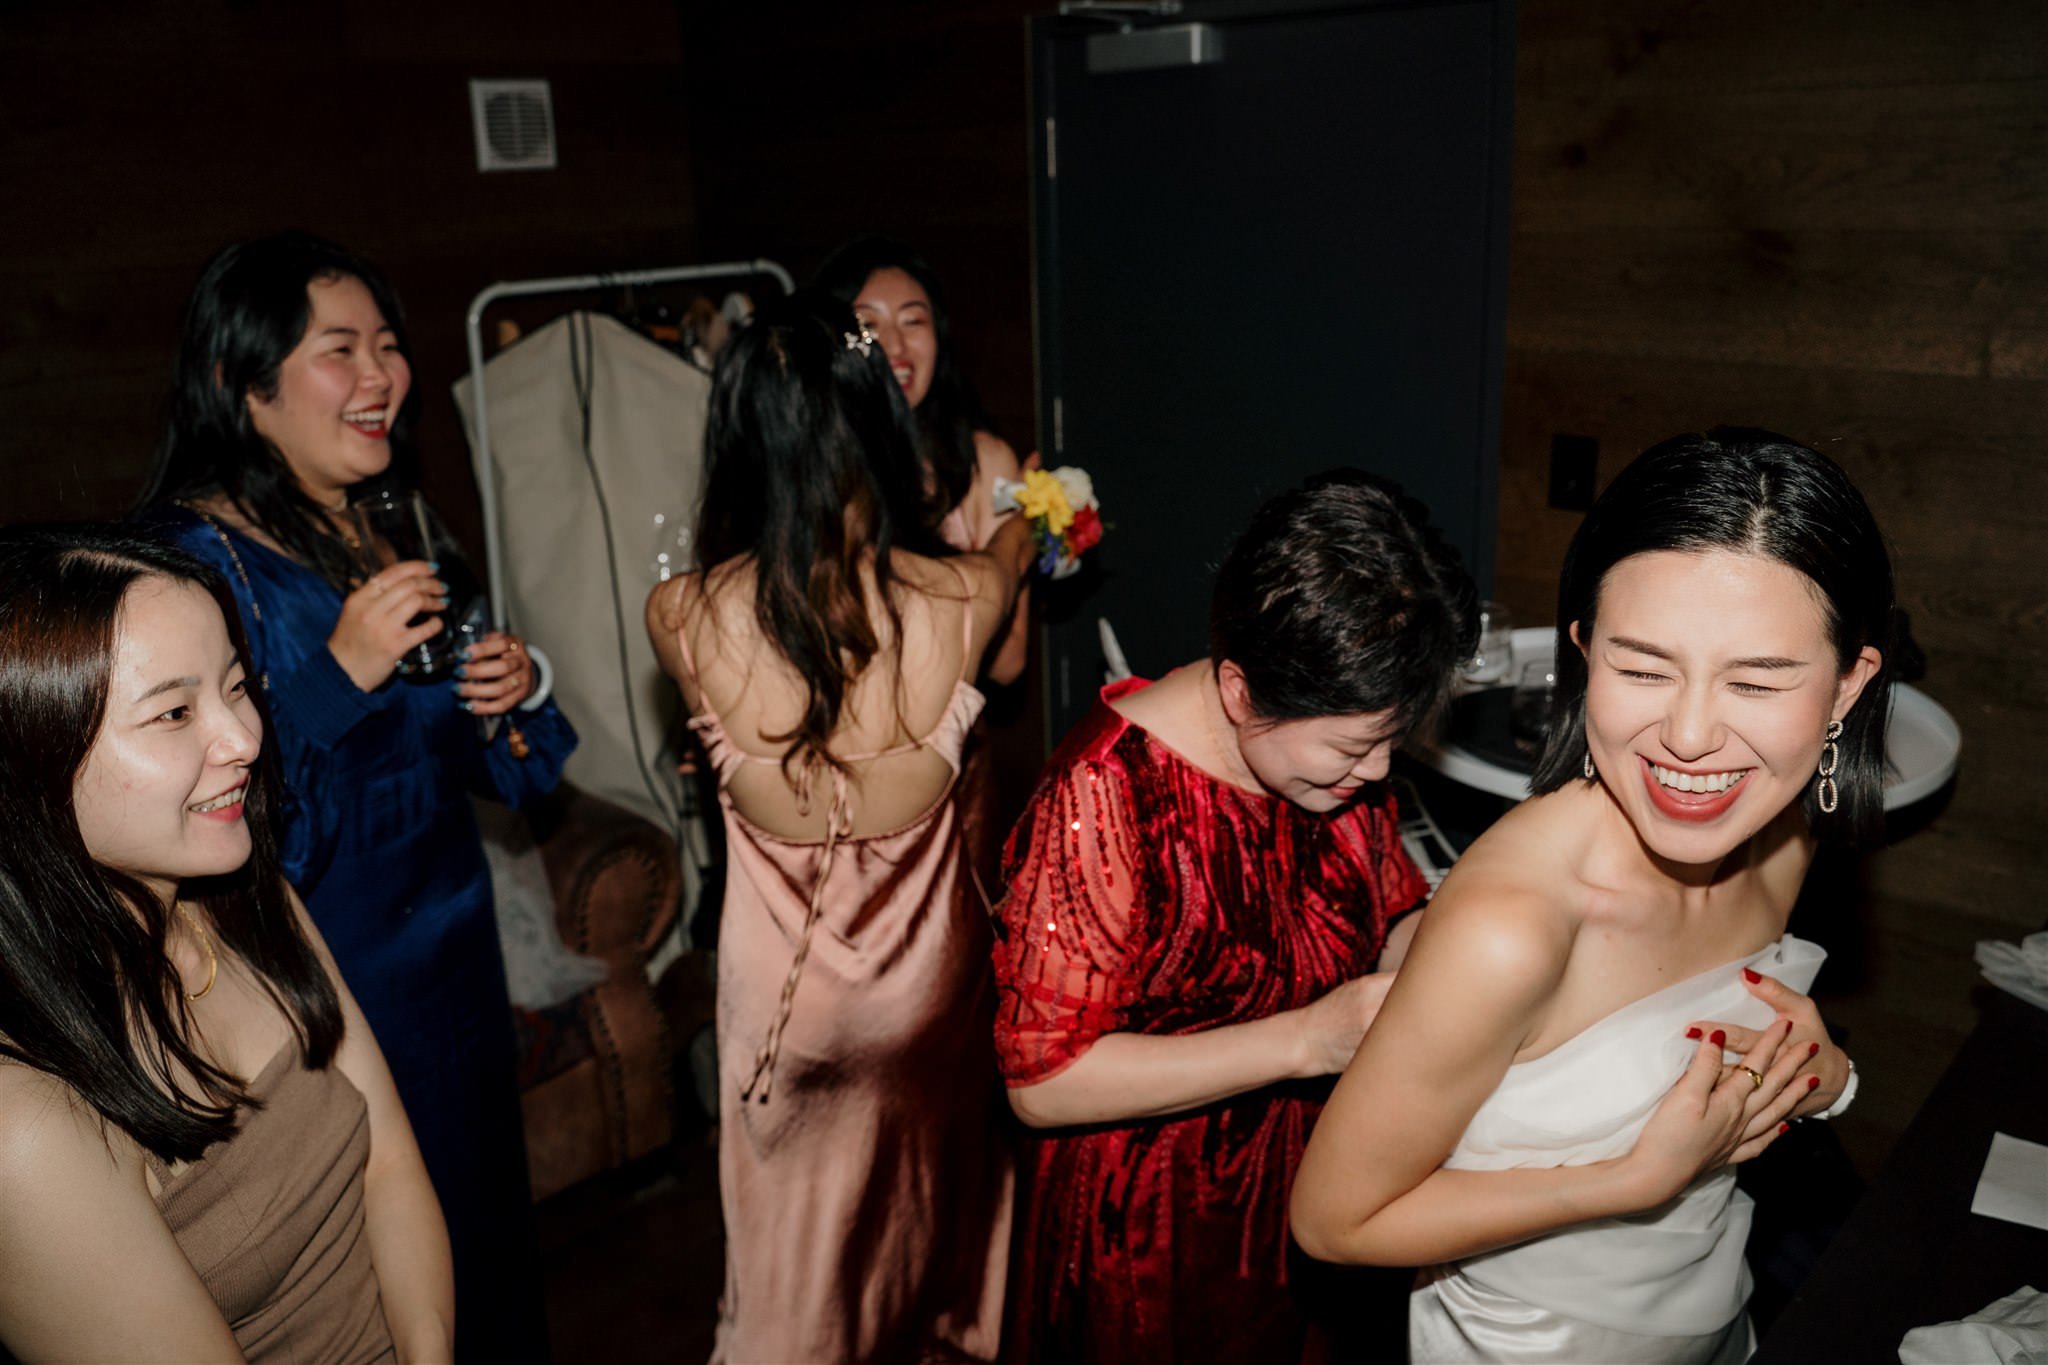 glasshouse-morningside-urban-best-auckland-wedding-venue-central-indoor-photographer-videographer-dear-white-productions-top-industrial-chinese-ceremony-tradition (54).jpg